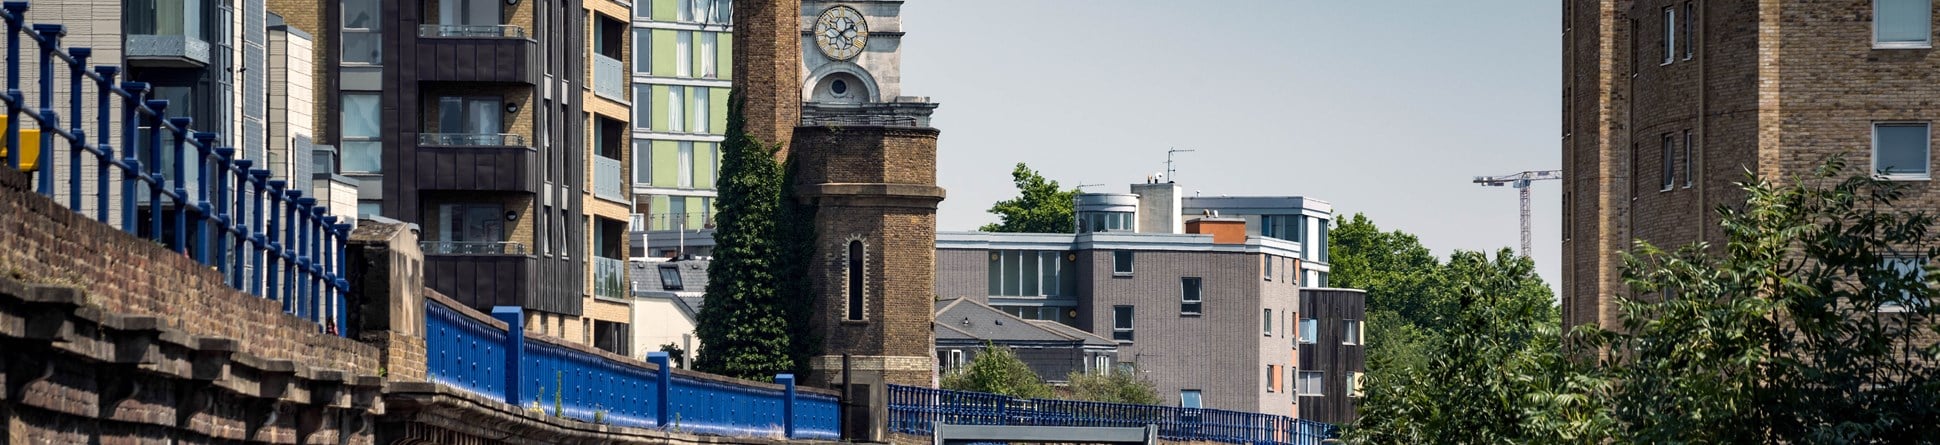 Accumulator Tower and Chimney, Limehouse Basin